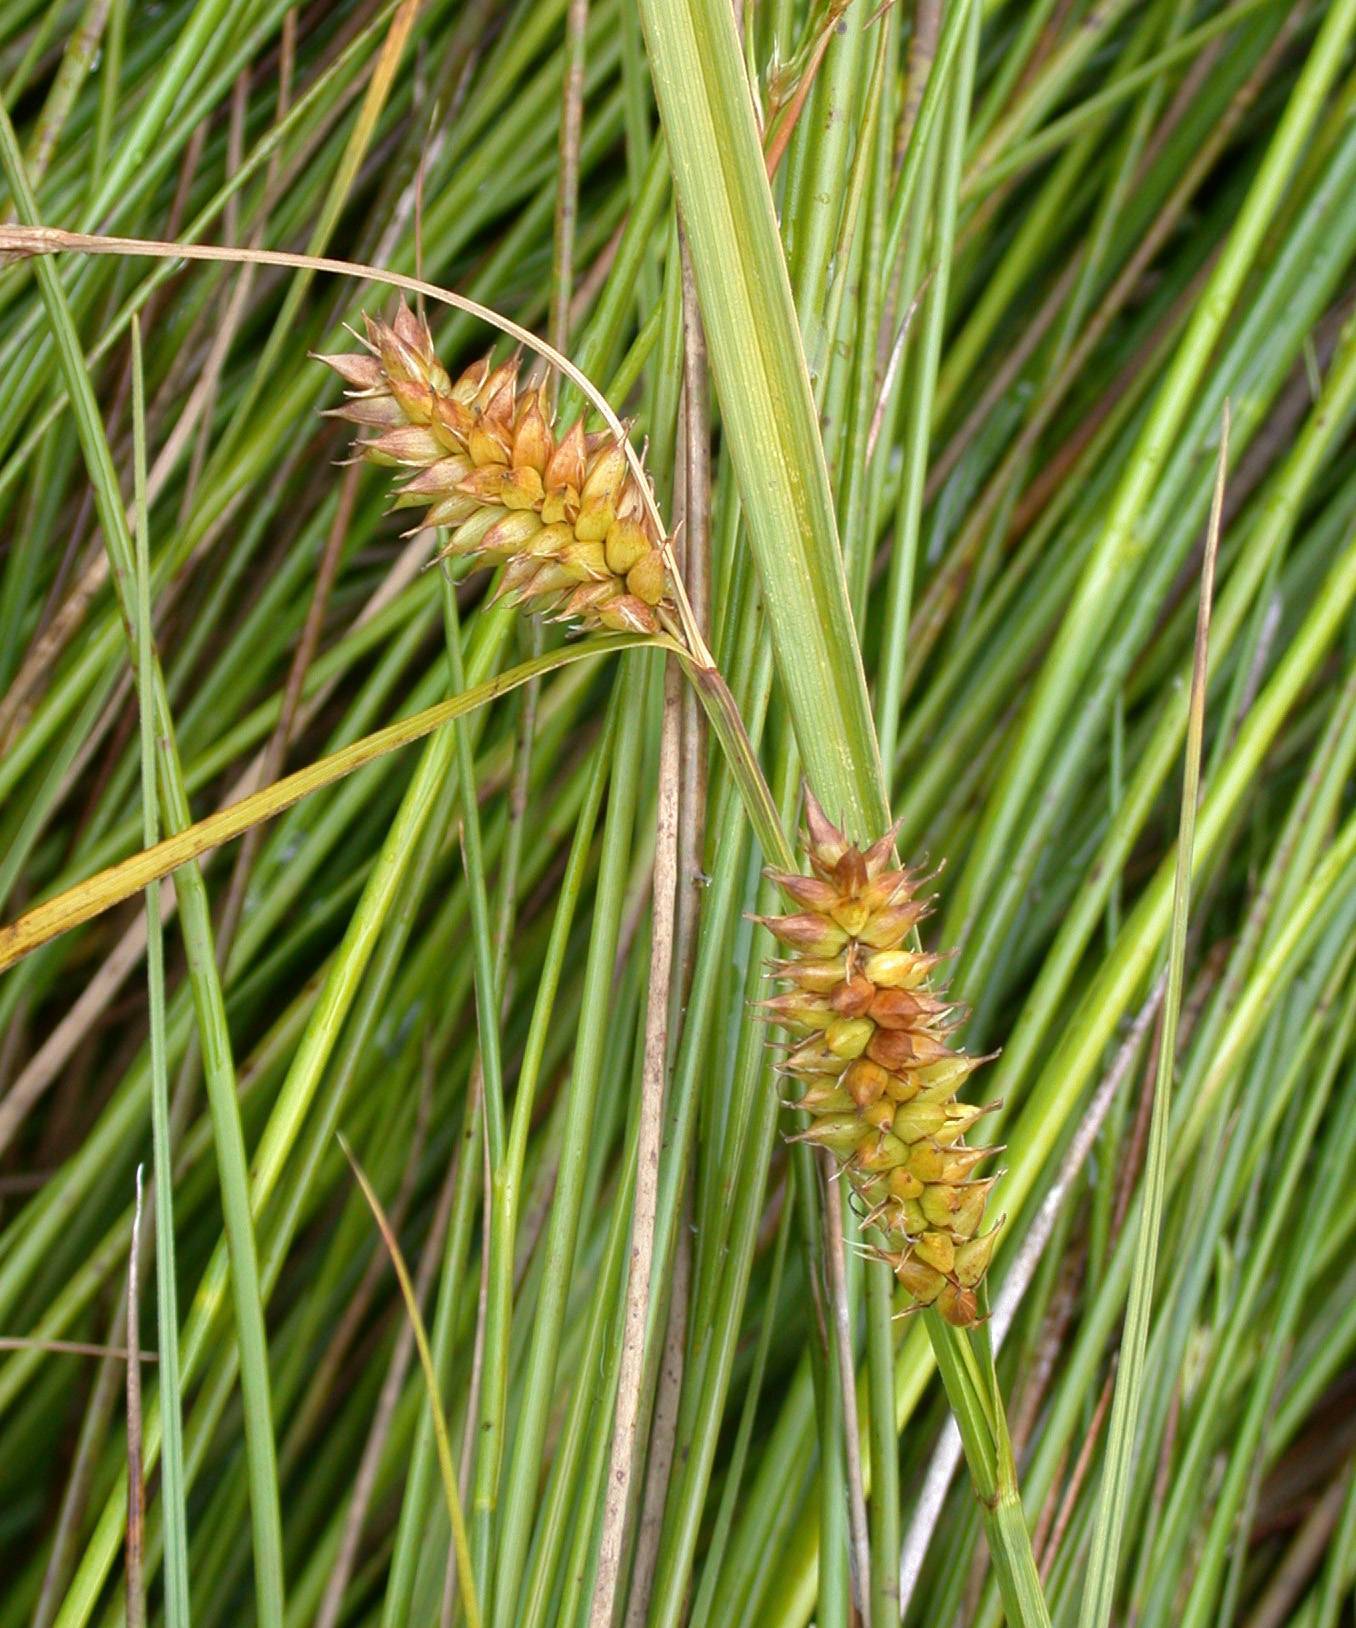 lime-pink spikelets with yellow-green foliage